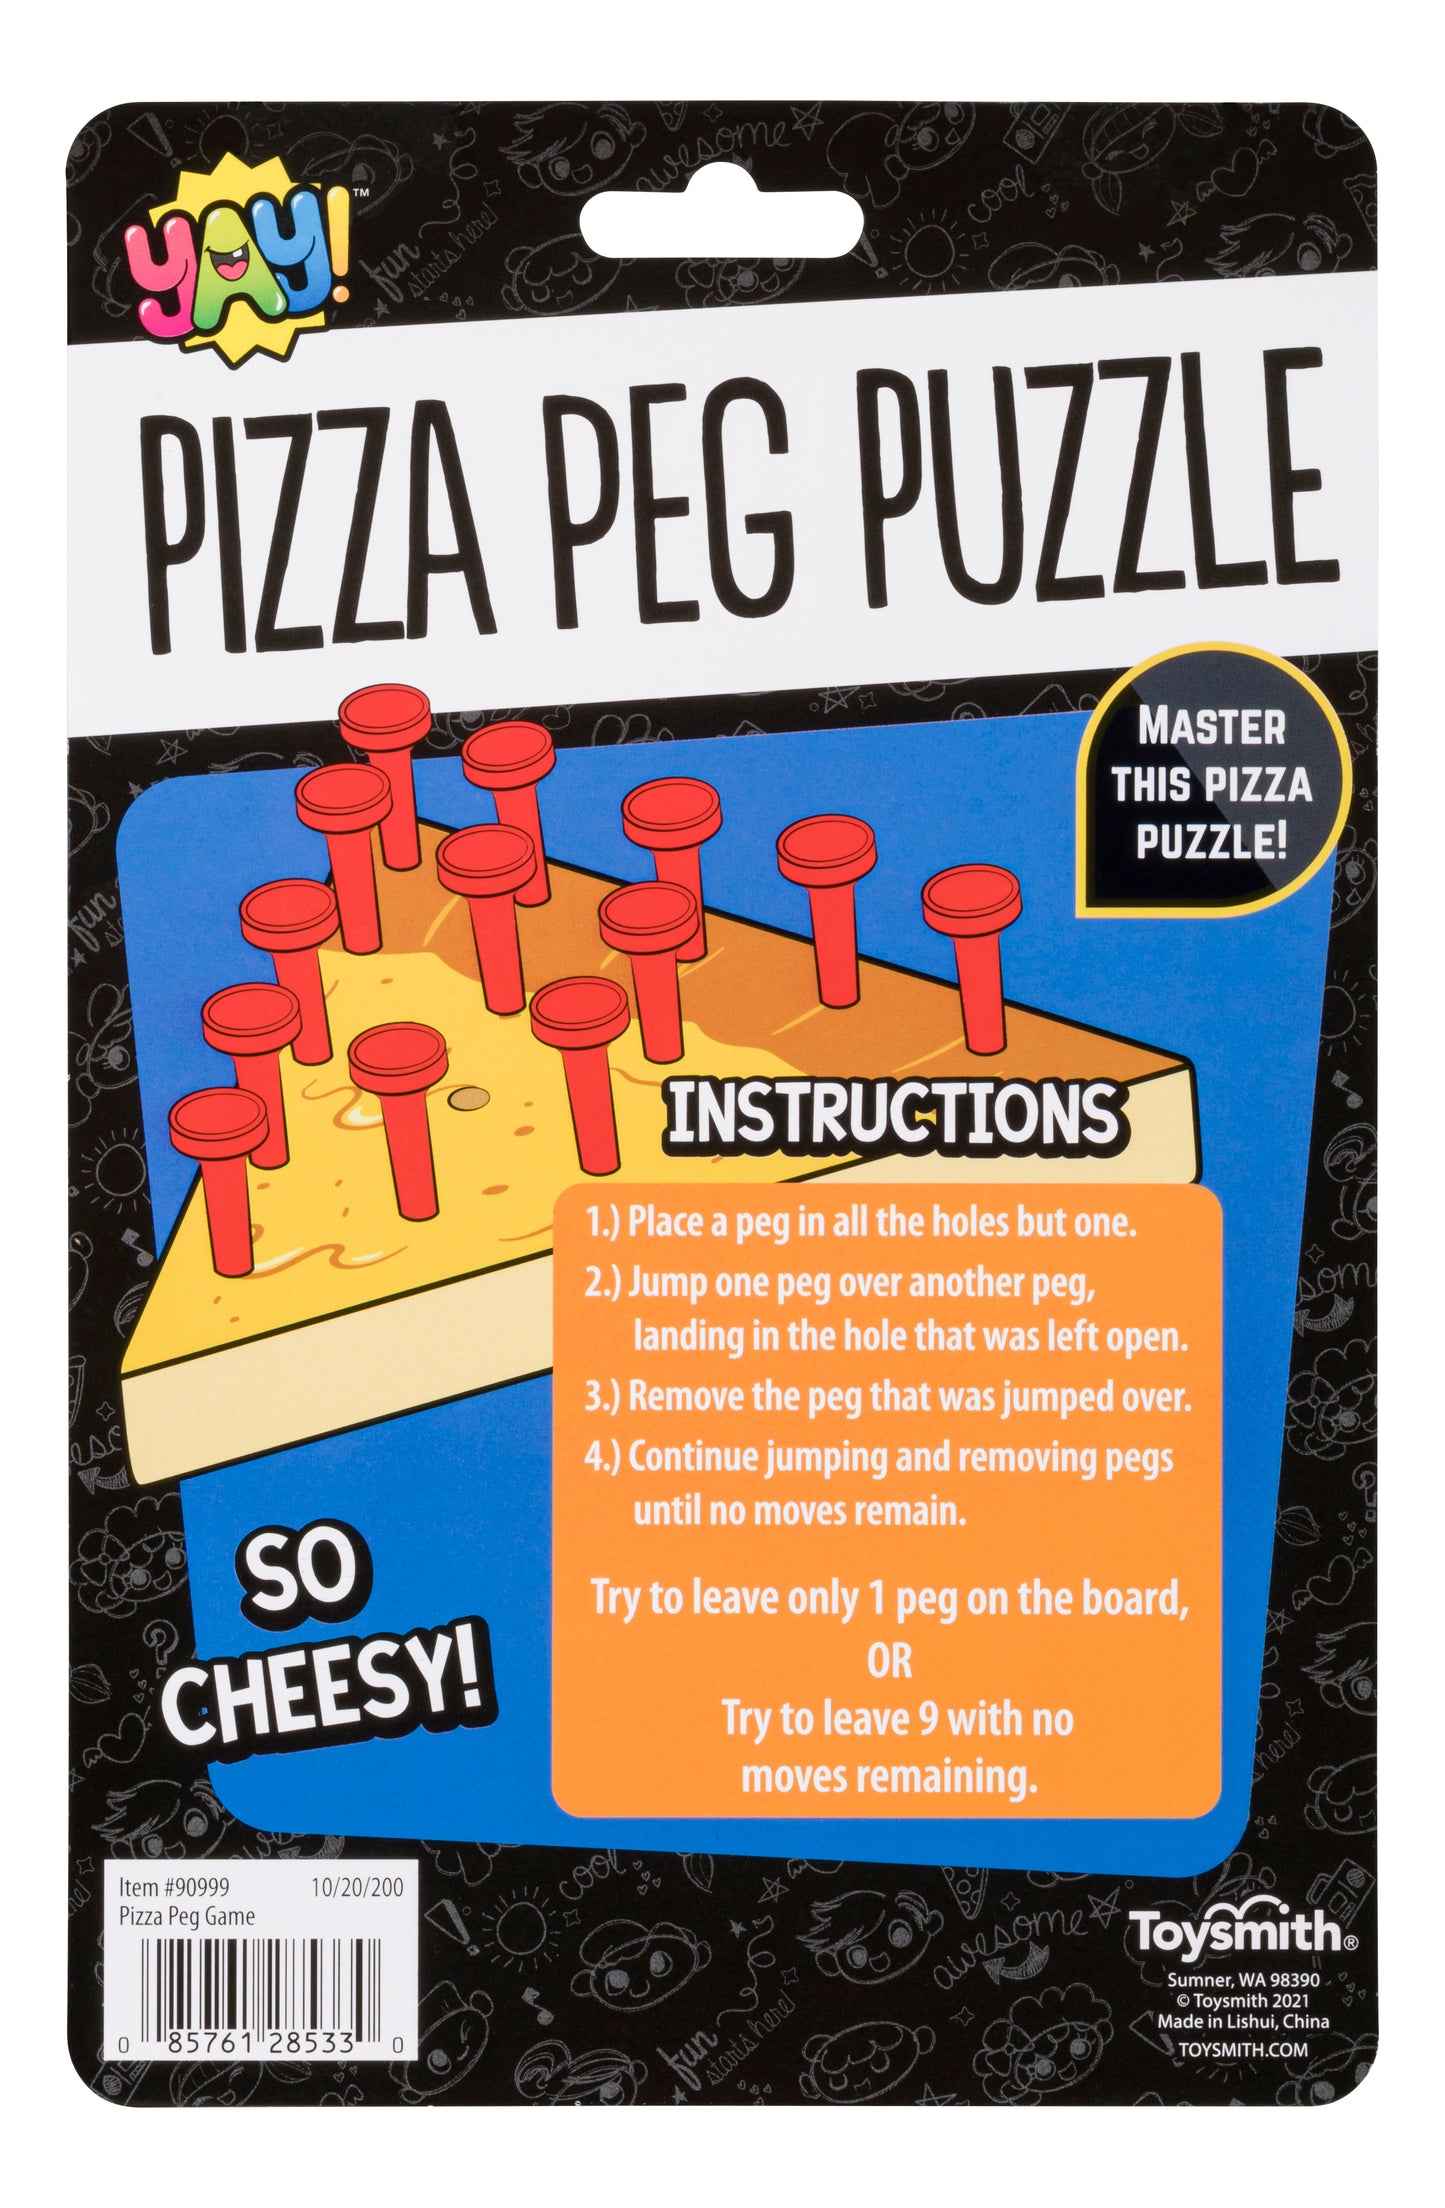 YAY! Pizza Puzzle Peg Game